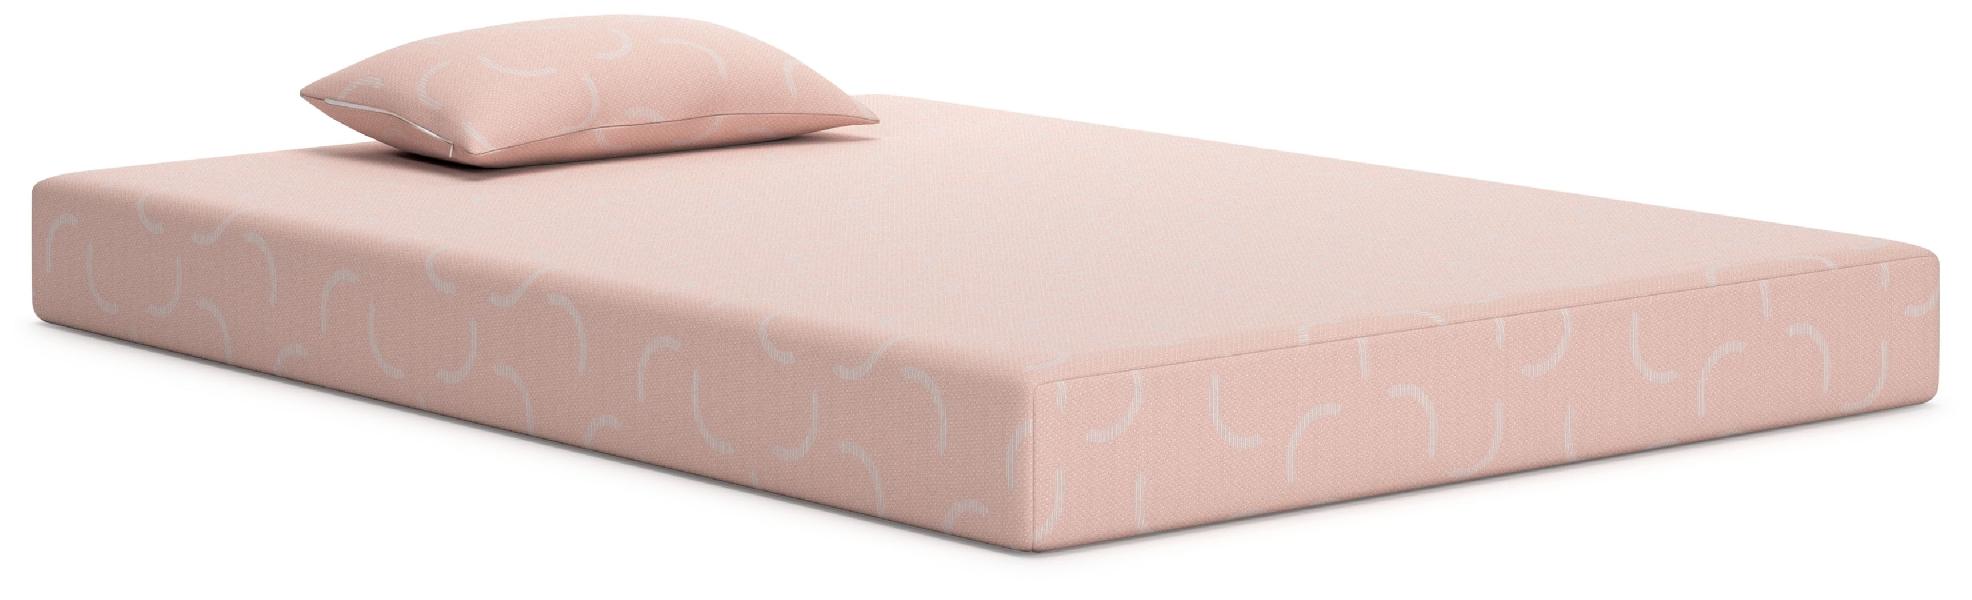 Image of Ikidz Coral - Coral - Full Mattress And Pillow Set of 2